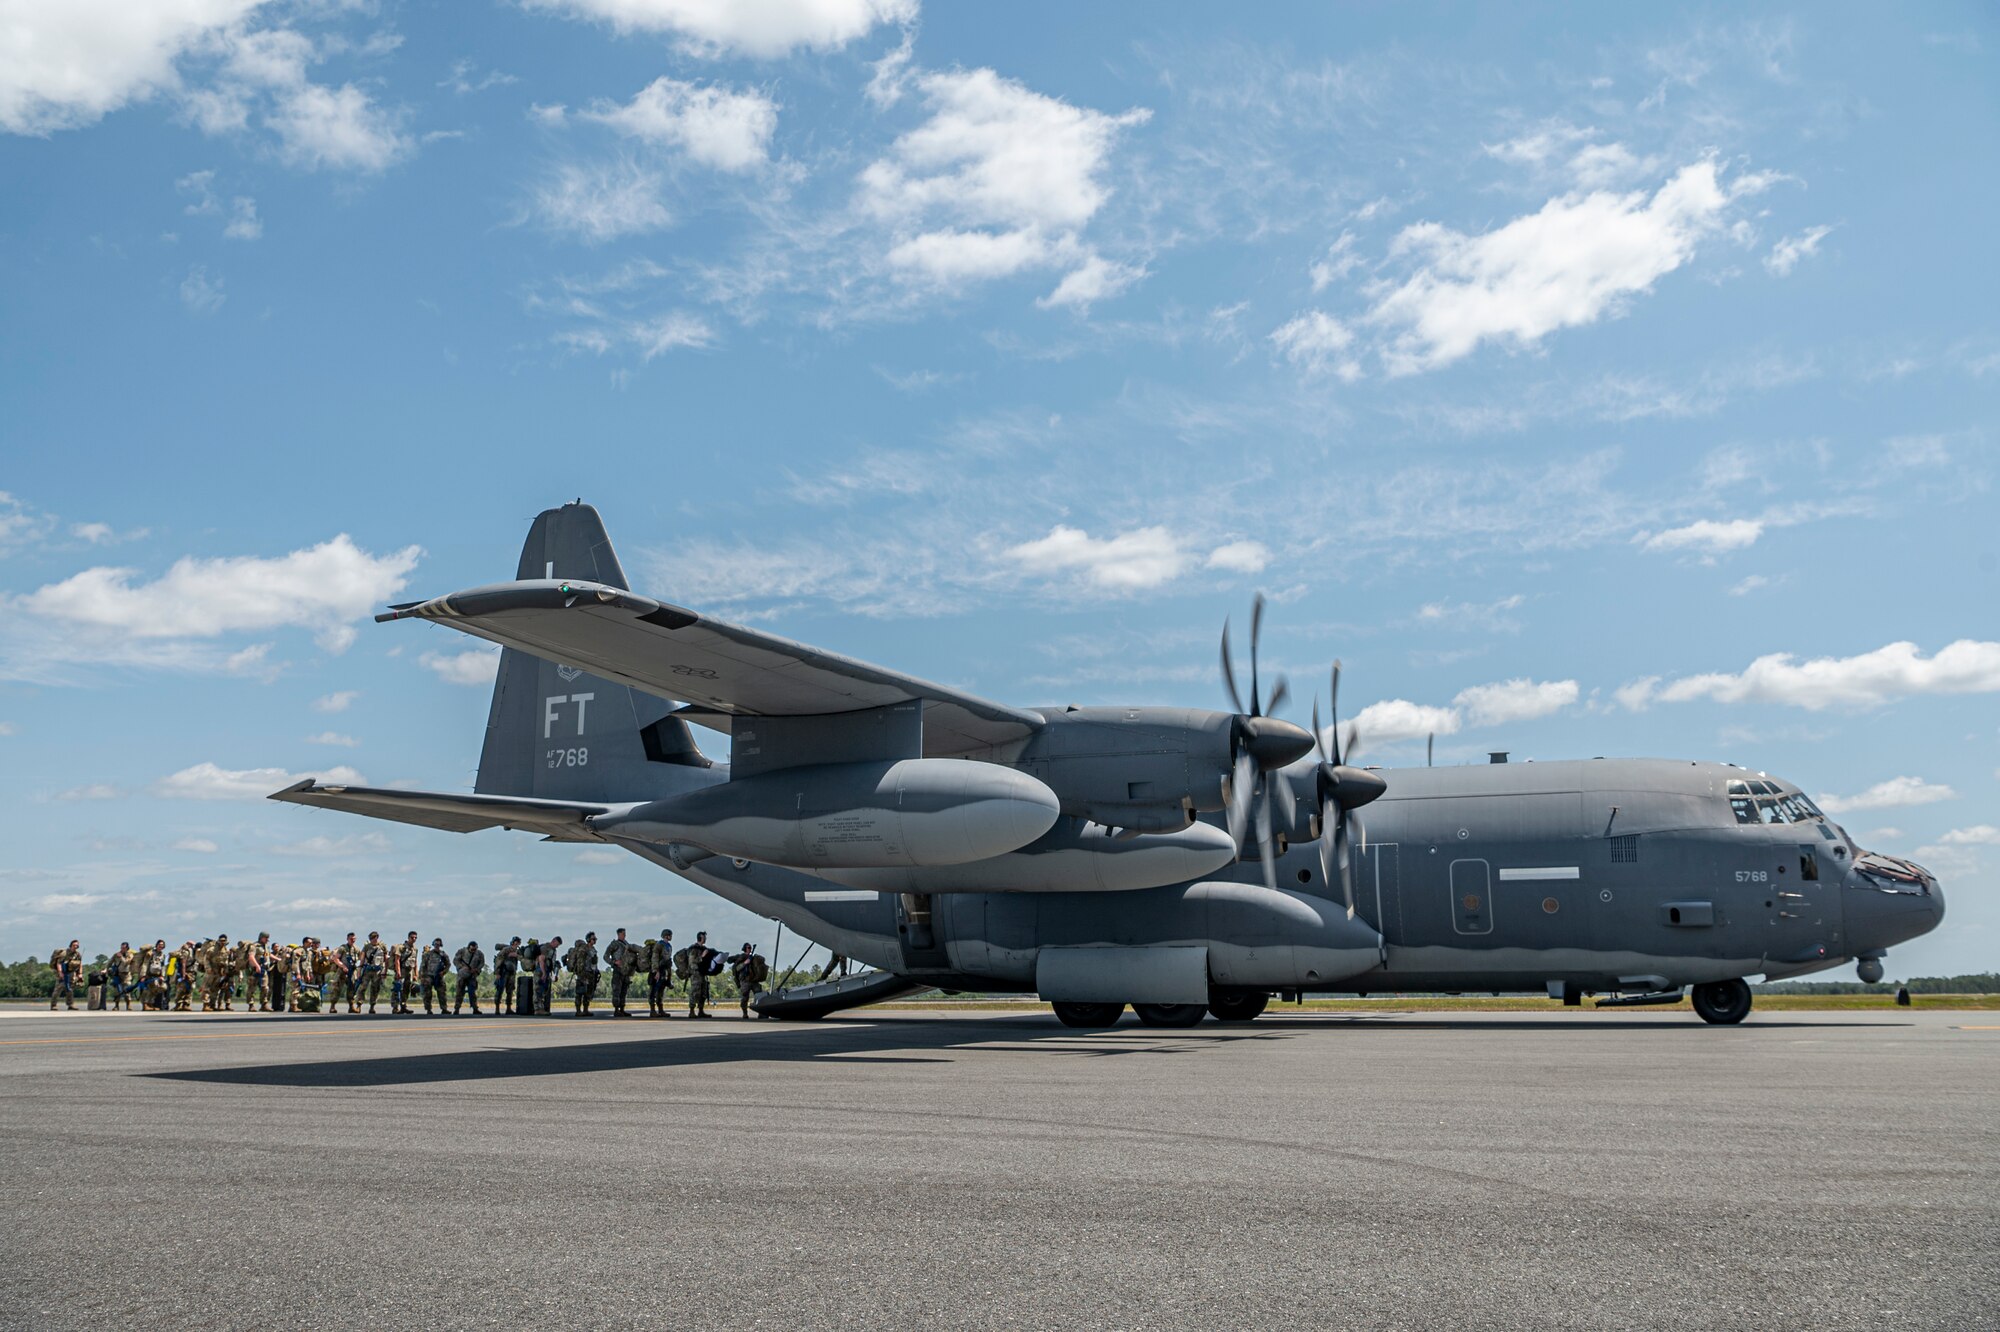 U.S. Air Force Airmen assigned to the 23rd Wing line up to board an HC-130J Combat King II for Exercise Ready Tiger 24-1 at Avon Park Air Force Range, Florida, April 10, 2024. HC-130J aircraft are flexible fixed-wing platforms that enable Airmen to execute transport and combat search and rescue missions. Ready Tiger 24-1 is a readiness exercise demonstrating the 23rd Wing’s ability to plan, prepare and execute operations and maintenance to project air power in contested and dispersed locations, defending the United States’ interests and allies. (U.S. Air Force photo by Airman 1st Class Leonid Soubbotine)